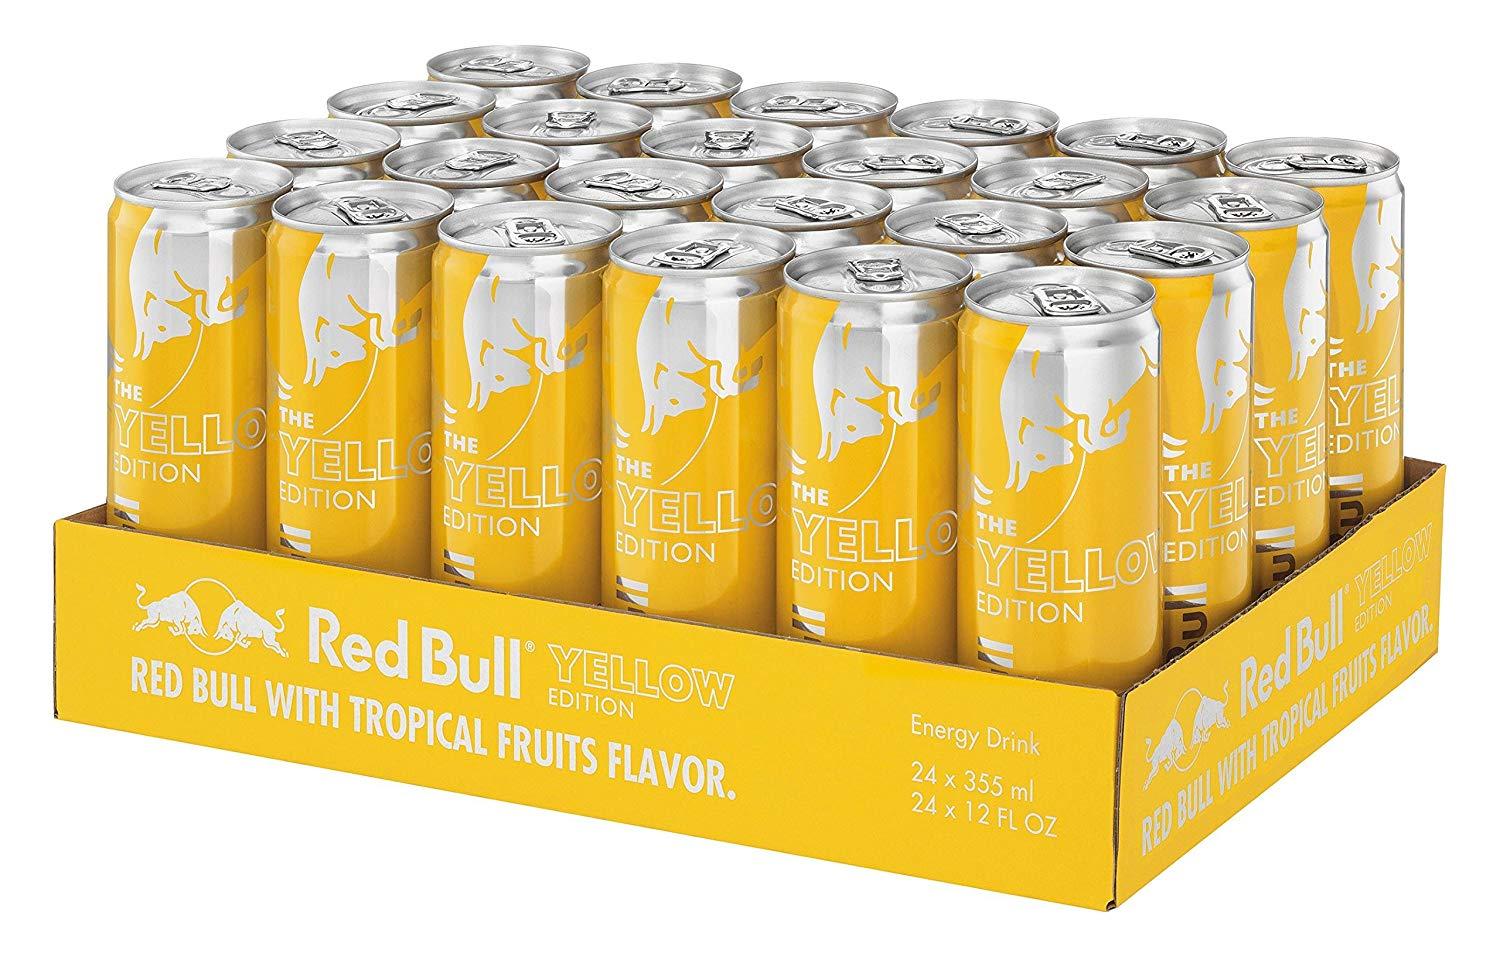 Red and Yellow Beverage Logo - Amazon.com : Red Bull Energy Drink, Tropical, 24 Pack of 12 Fl Oz